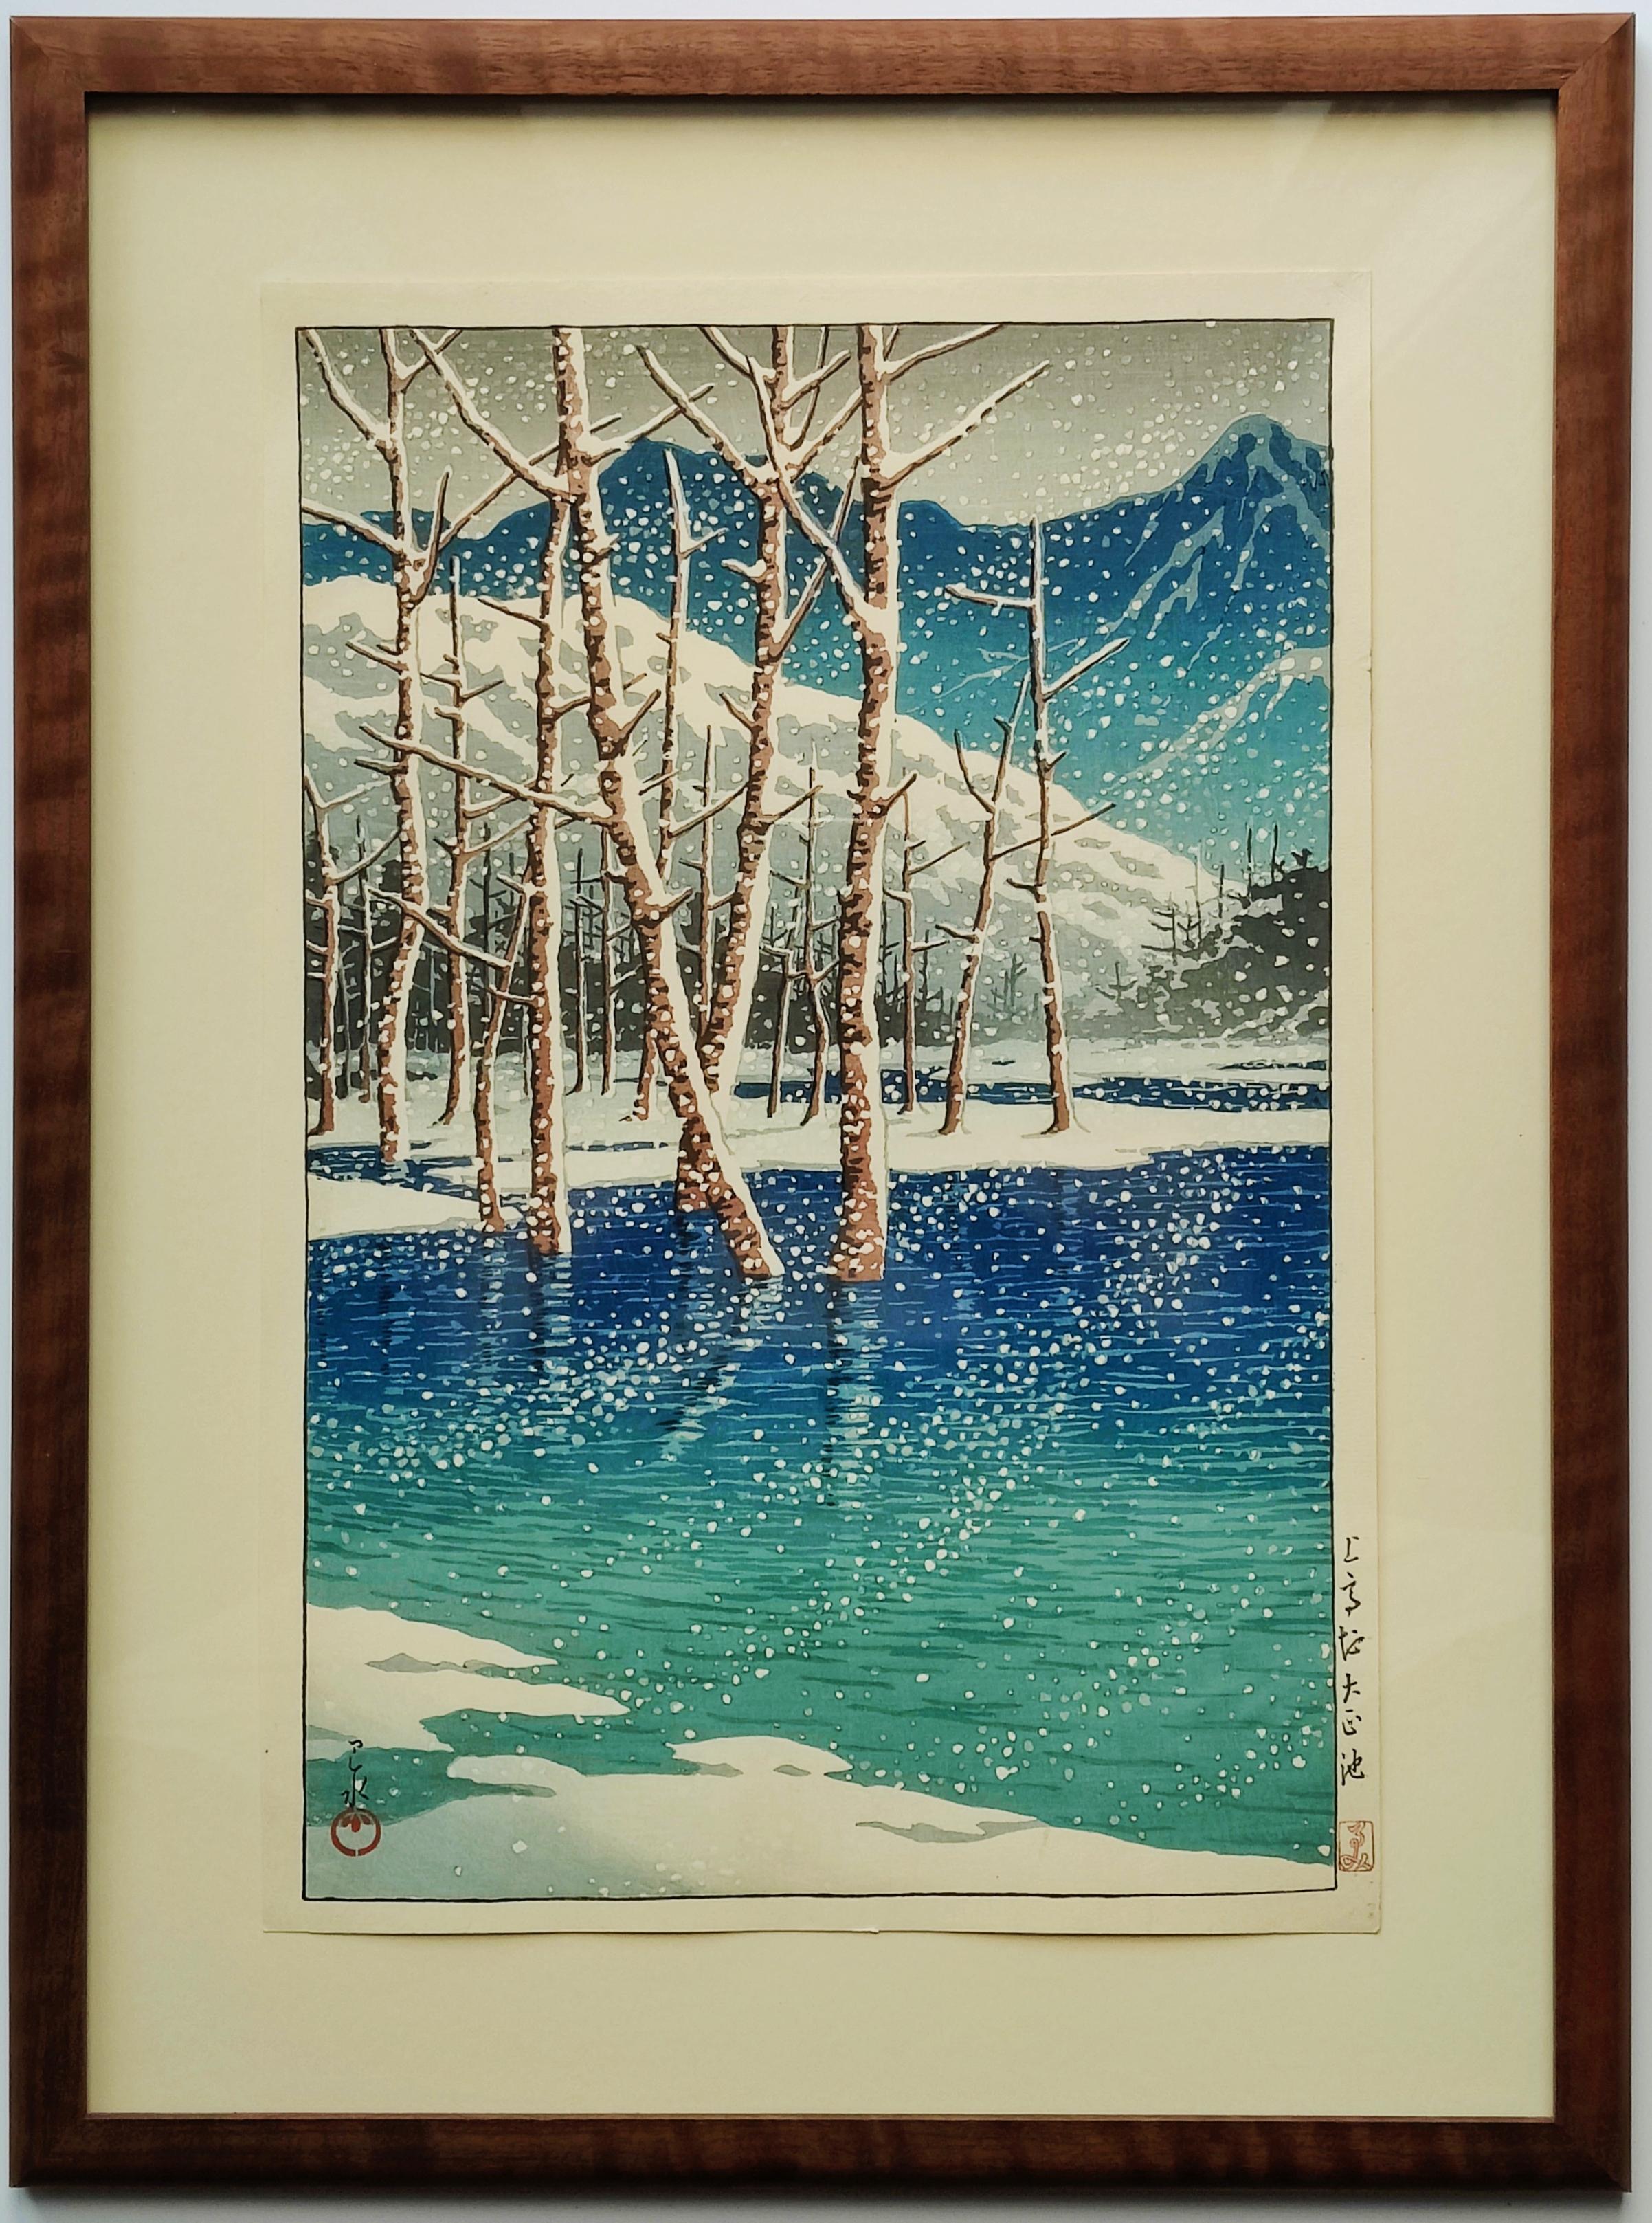 Kawase Hasui 川瀬 巴水 (1883-1957)
Title: Taisho Pond Kamikochi  土高橋大正池
Date: Ca. 1927
First state
Oban
frame size: 49.8 x 37.5 x 2 cm
The red “Rumi” seal of the publisher in the lower right corner, very rarely
Excellent impression and colour

Gusts of